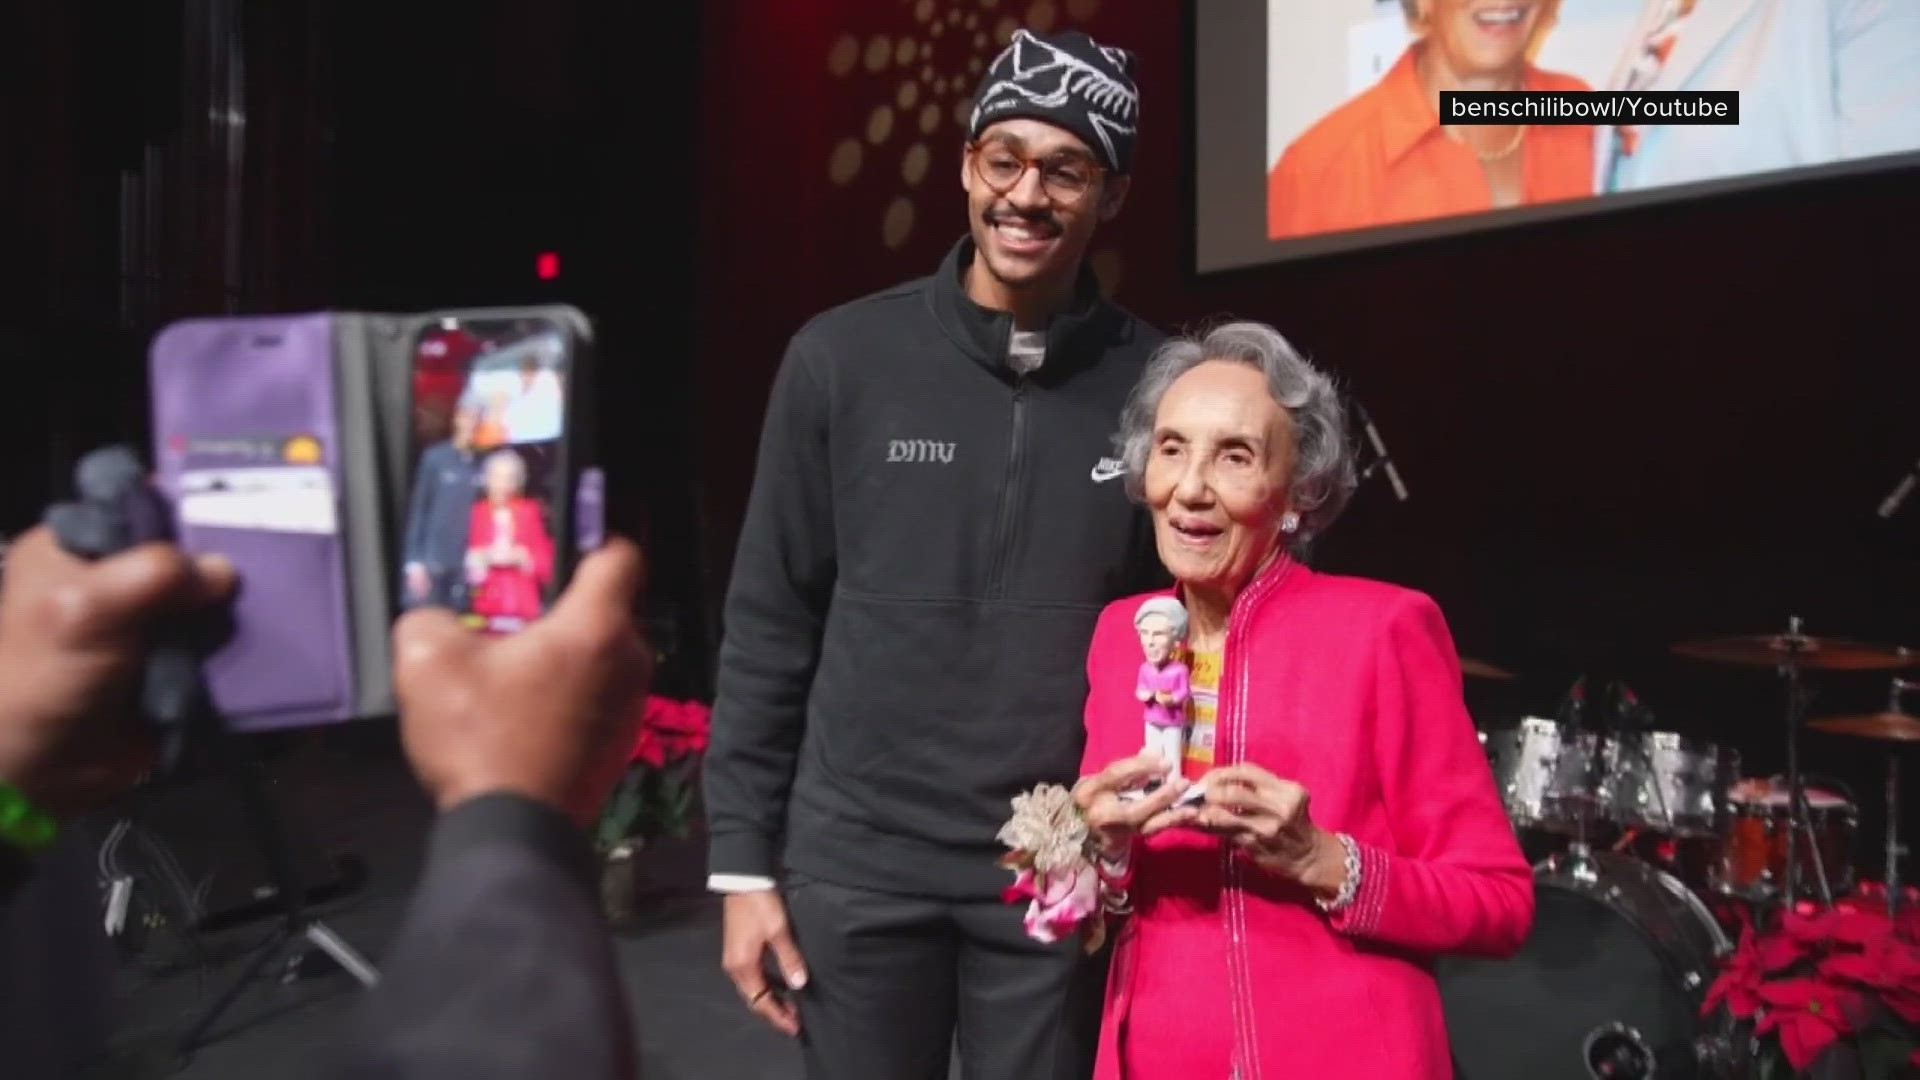 Jordan Poole of the Wizards recently presented Mrs. Ali with her bobblehead during her 90th birthday celebration.